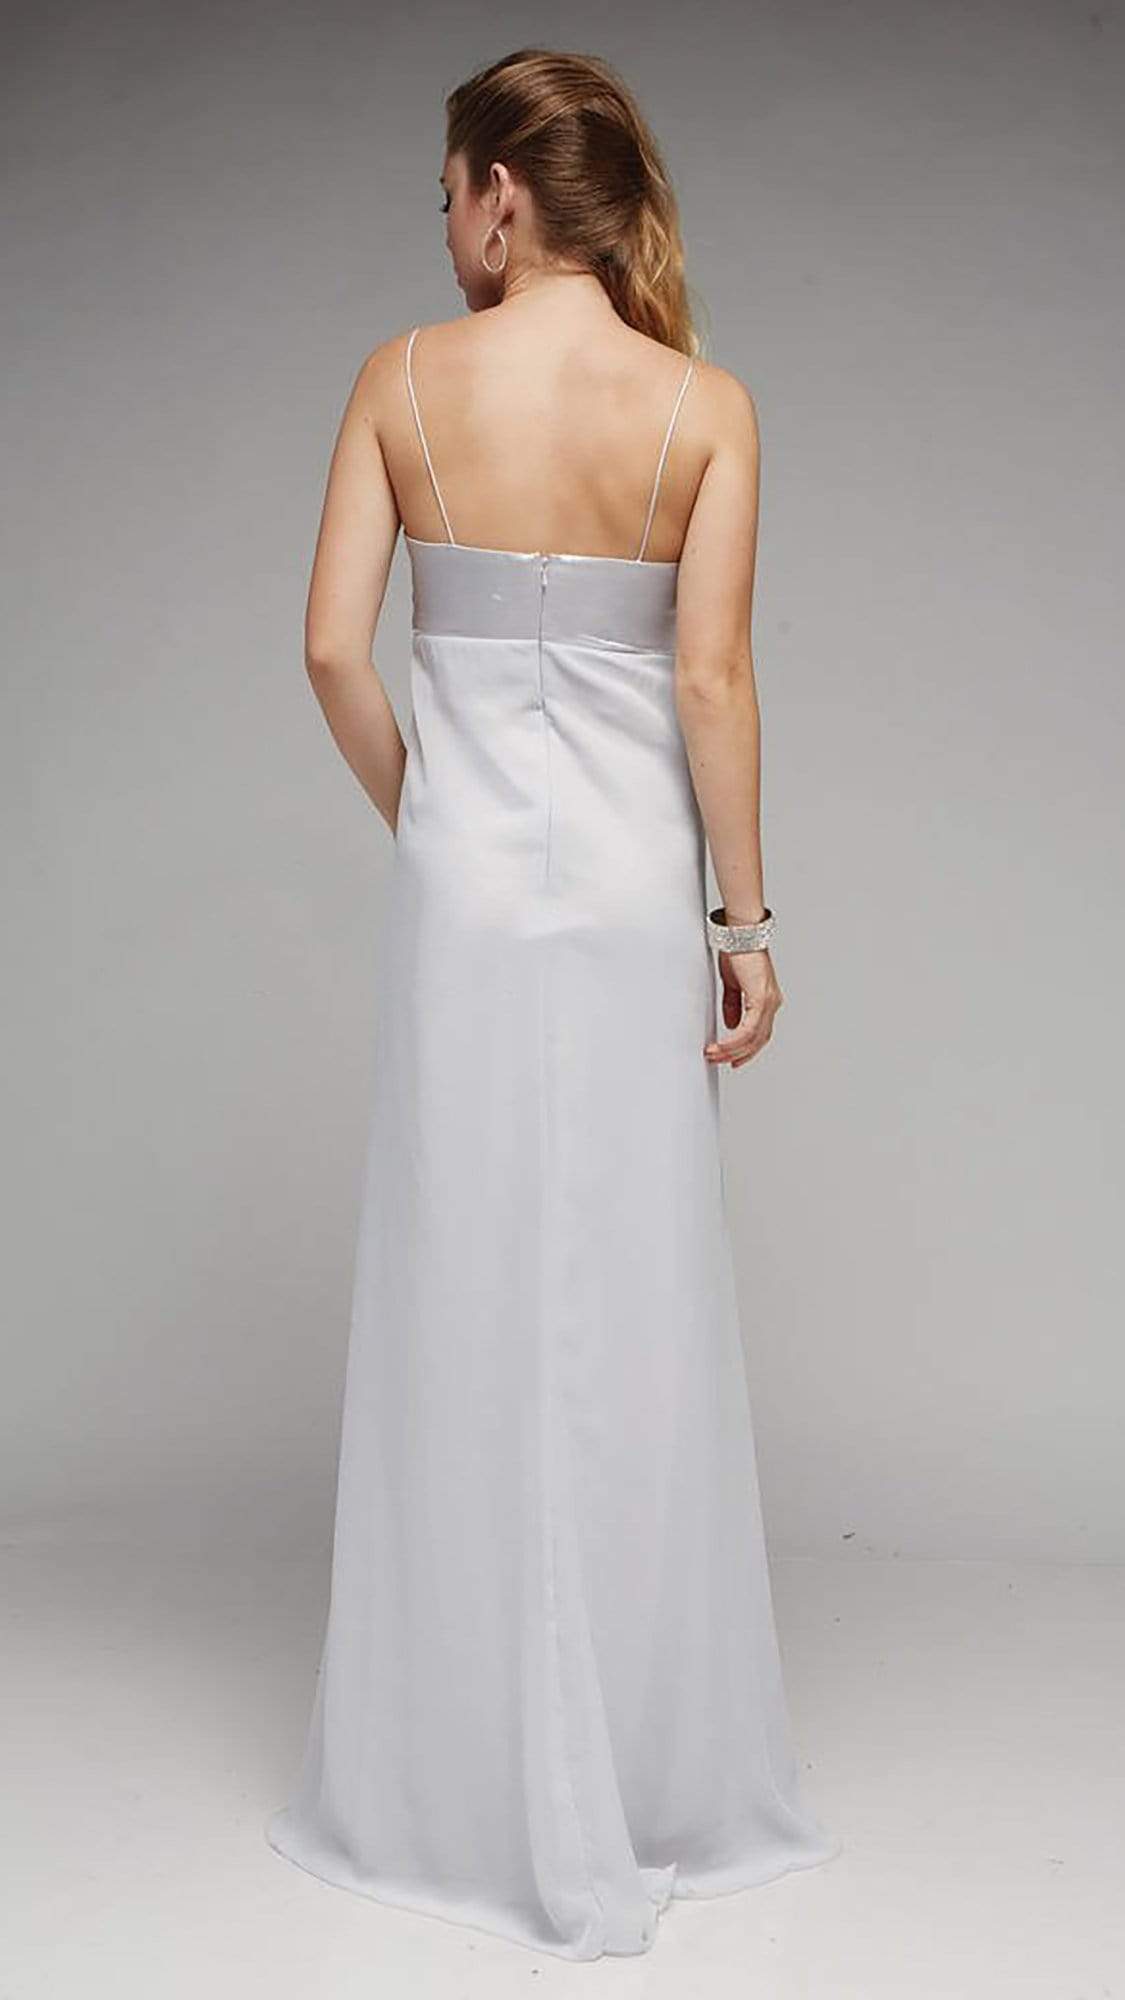 Milano Formals F1116 Long Empire Waist Spaghetti Strap Gown - 1 pc Silver in Size 6 Available CCSALE 6 / Silver